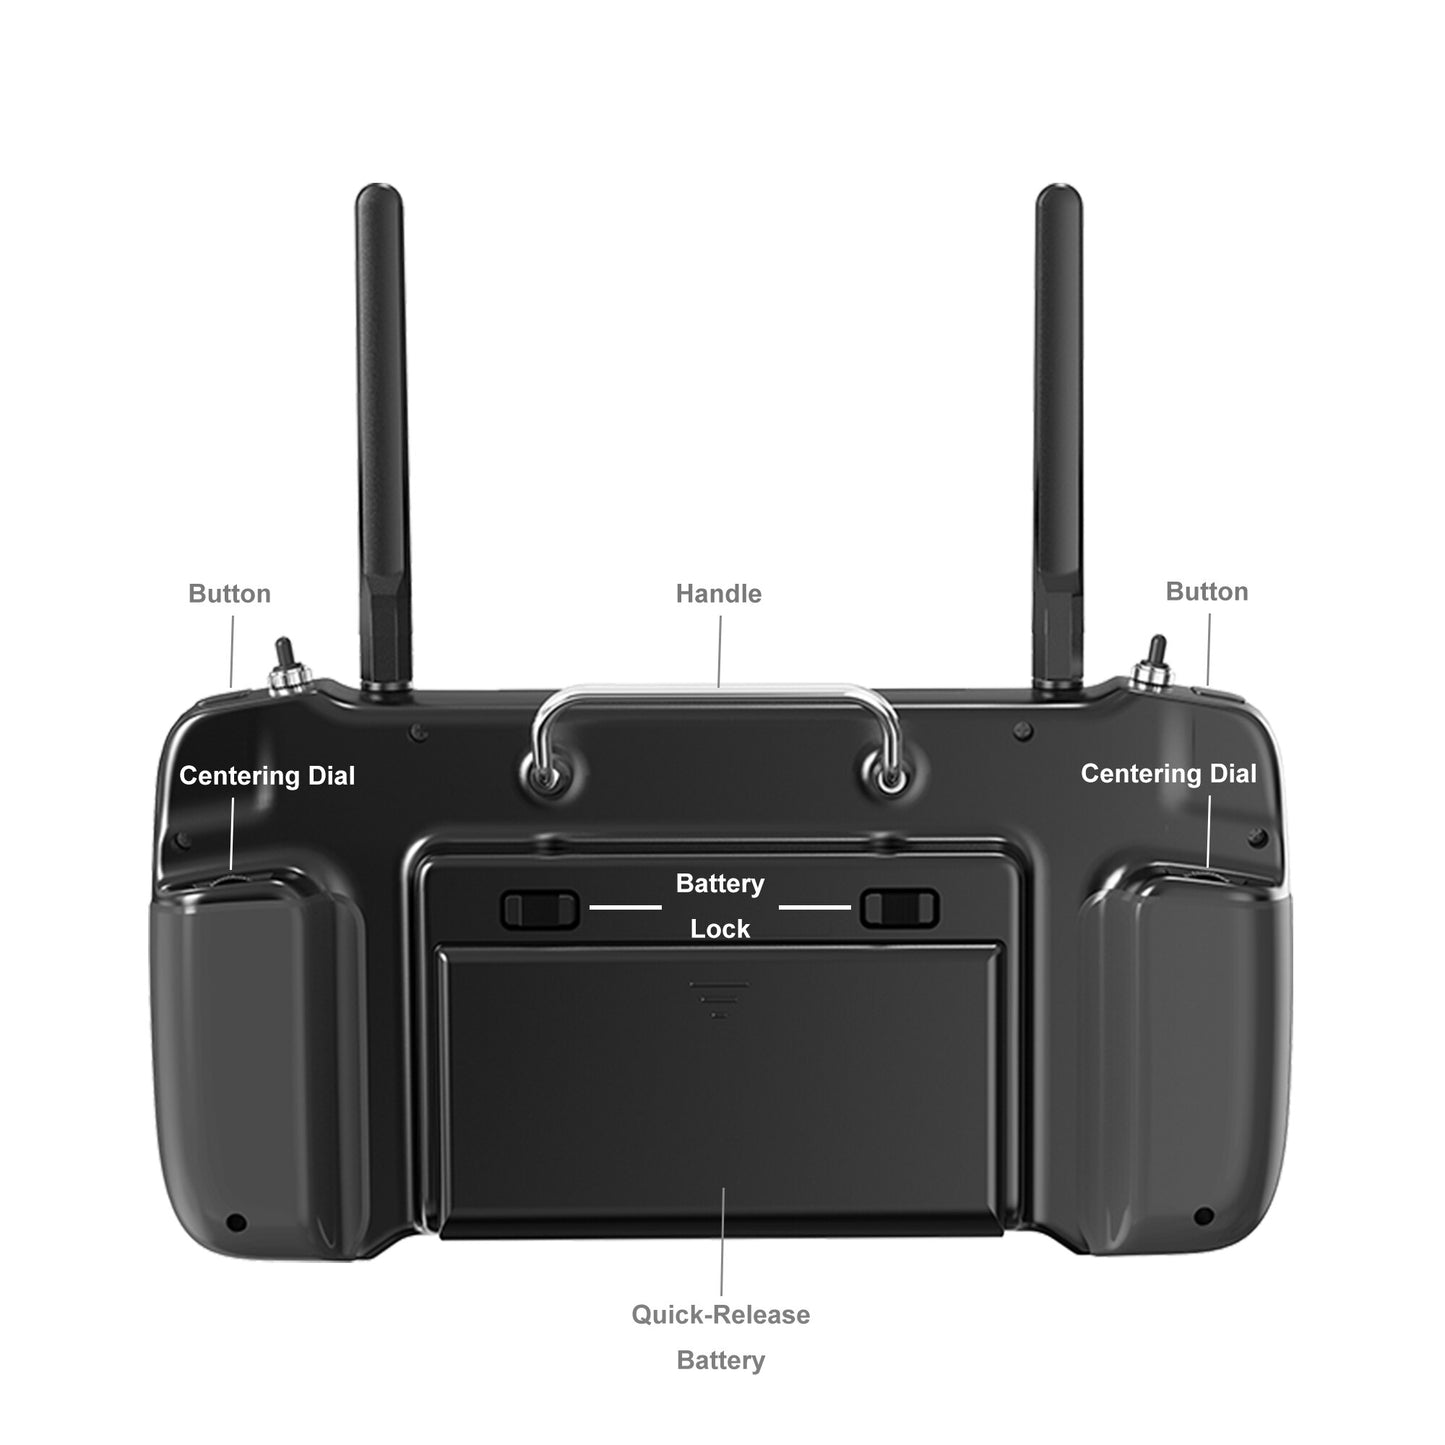 CUAV SIYI MK32 15 KM Wireless Digital Image Transmission, Button Handle Button Centering Dial Battery Lock Quick-Release Battery